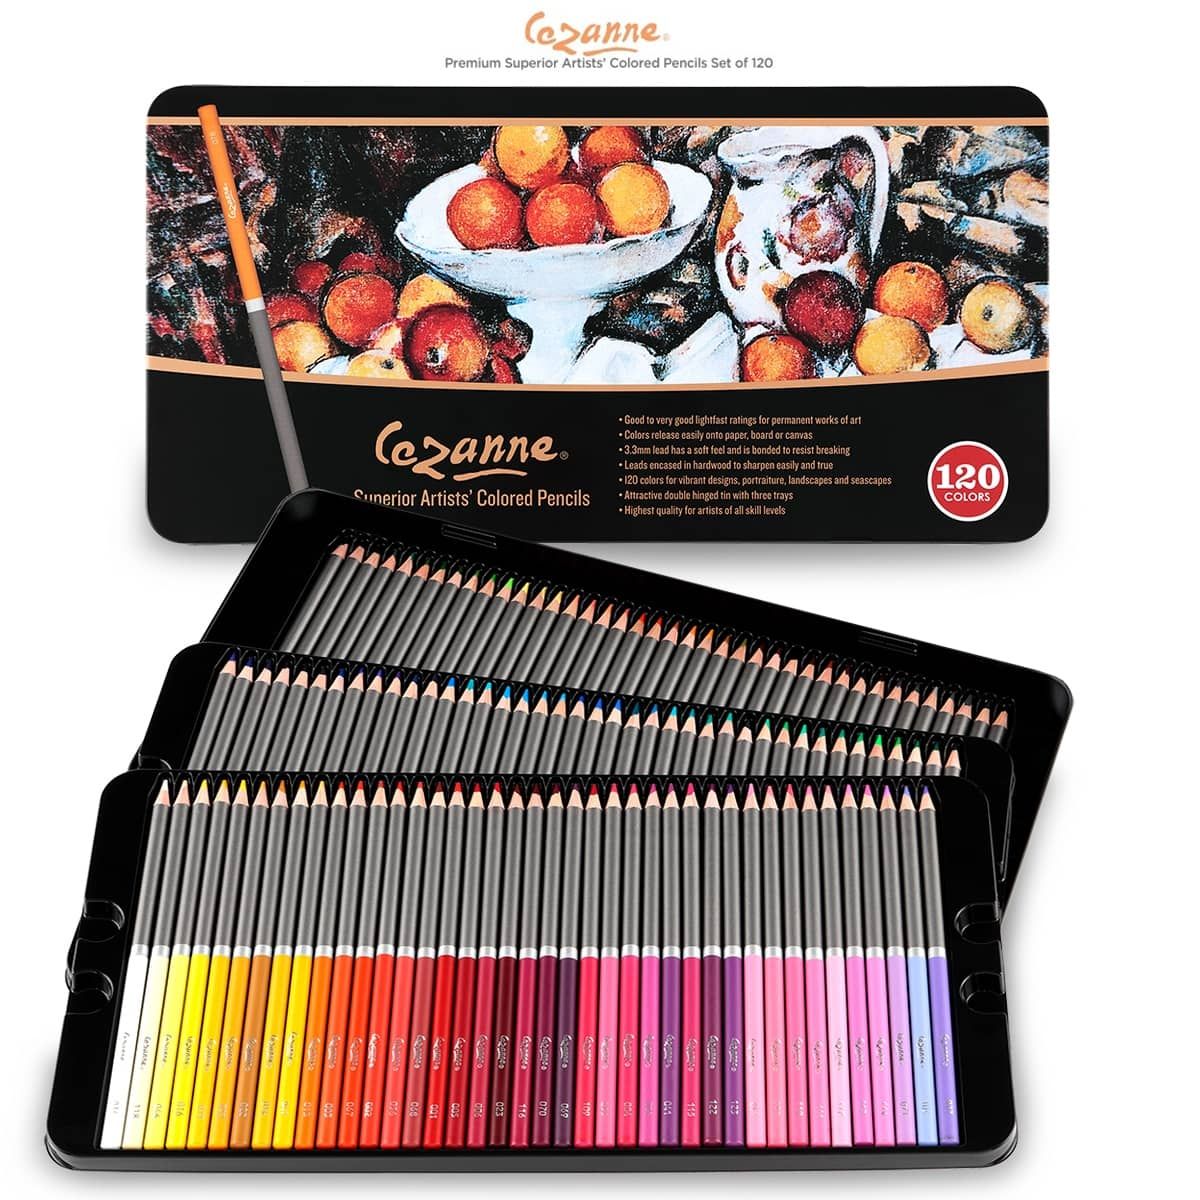 Colored Pencils, 50 Colored Pencils. Colored Pencils for adult Coloring.  Coloring Pencils with Sharpener ultimate Color Pencil Set.